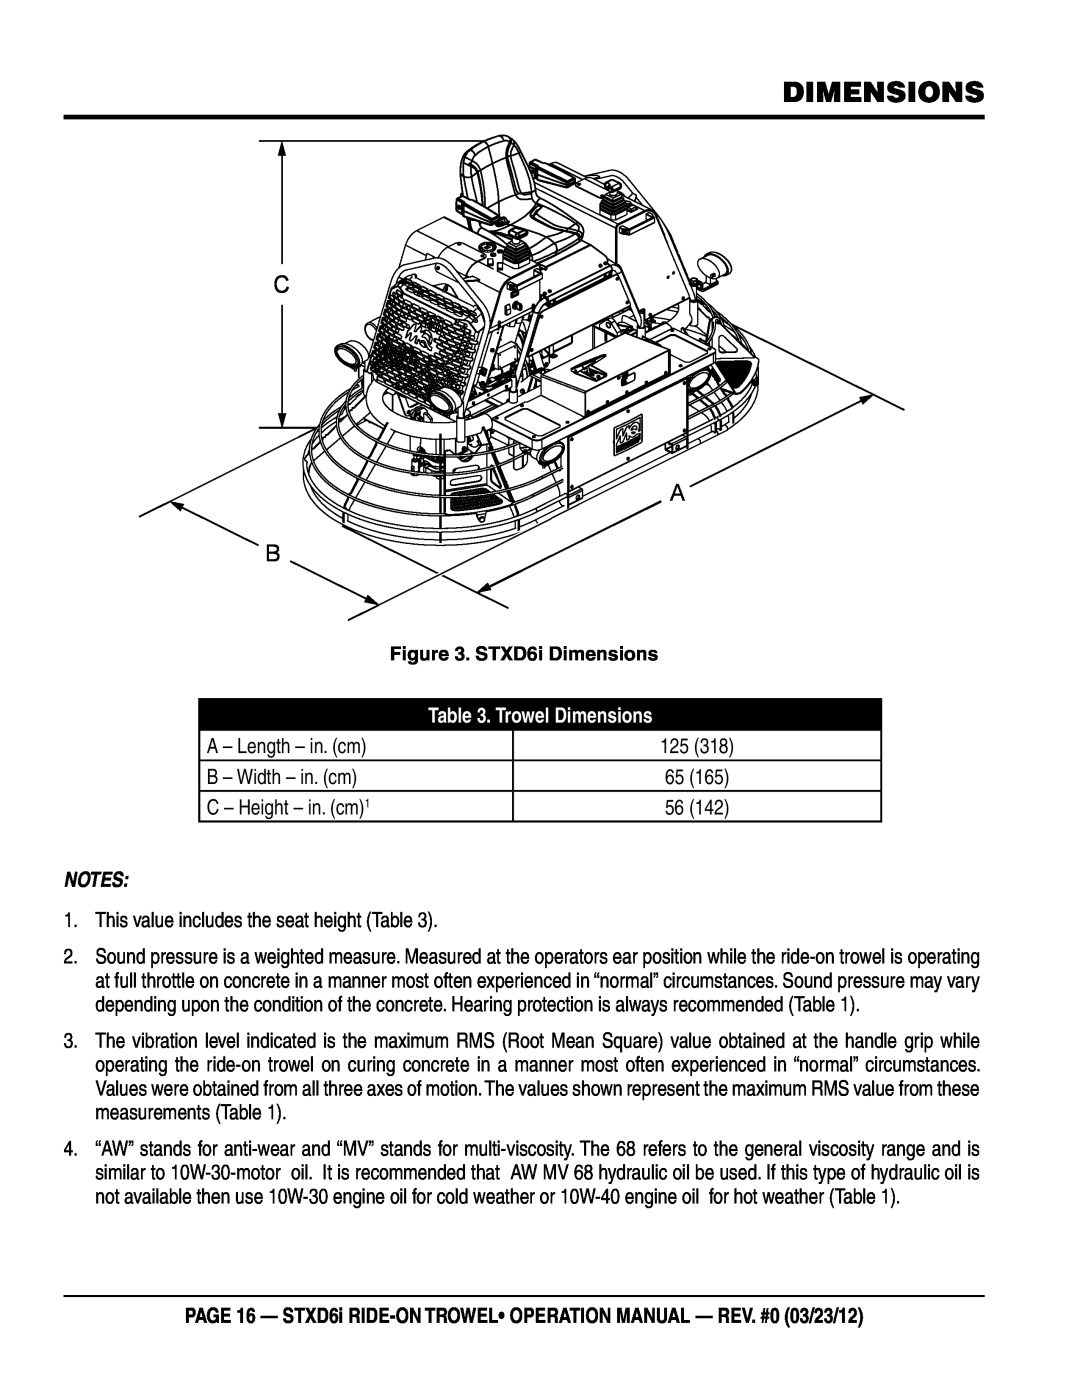 Multiquip STXD6i C A B, Trowel Dimensions, page 16 - stxd6i RIDE-ON TROWEL operation manual - rev. #0 03/23/12 